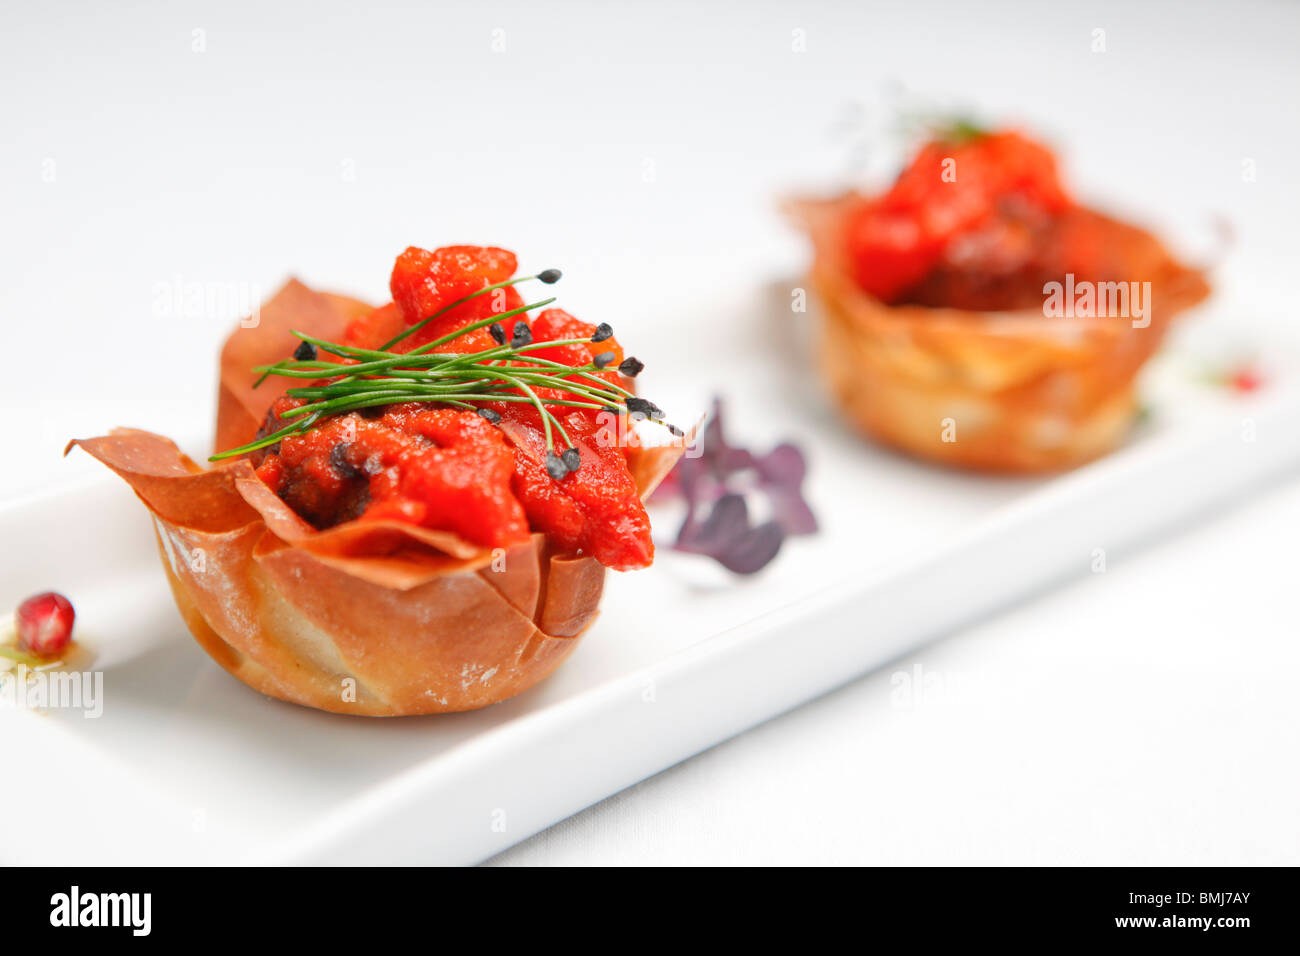 Tomato and pastry mezze food served in a restaurant Stock Photo